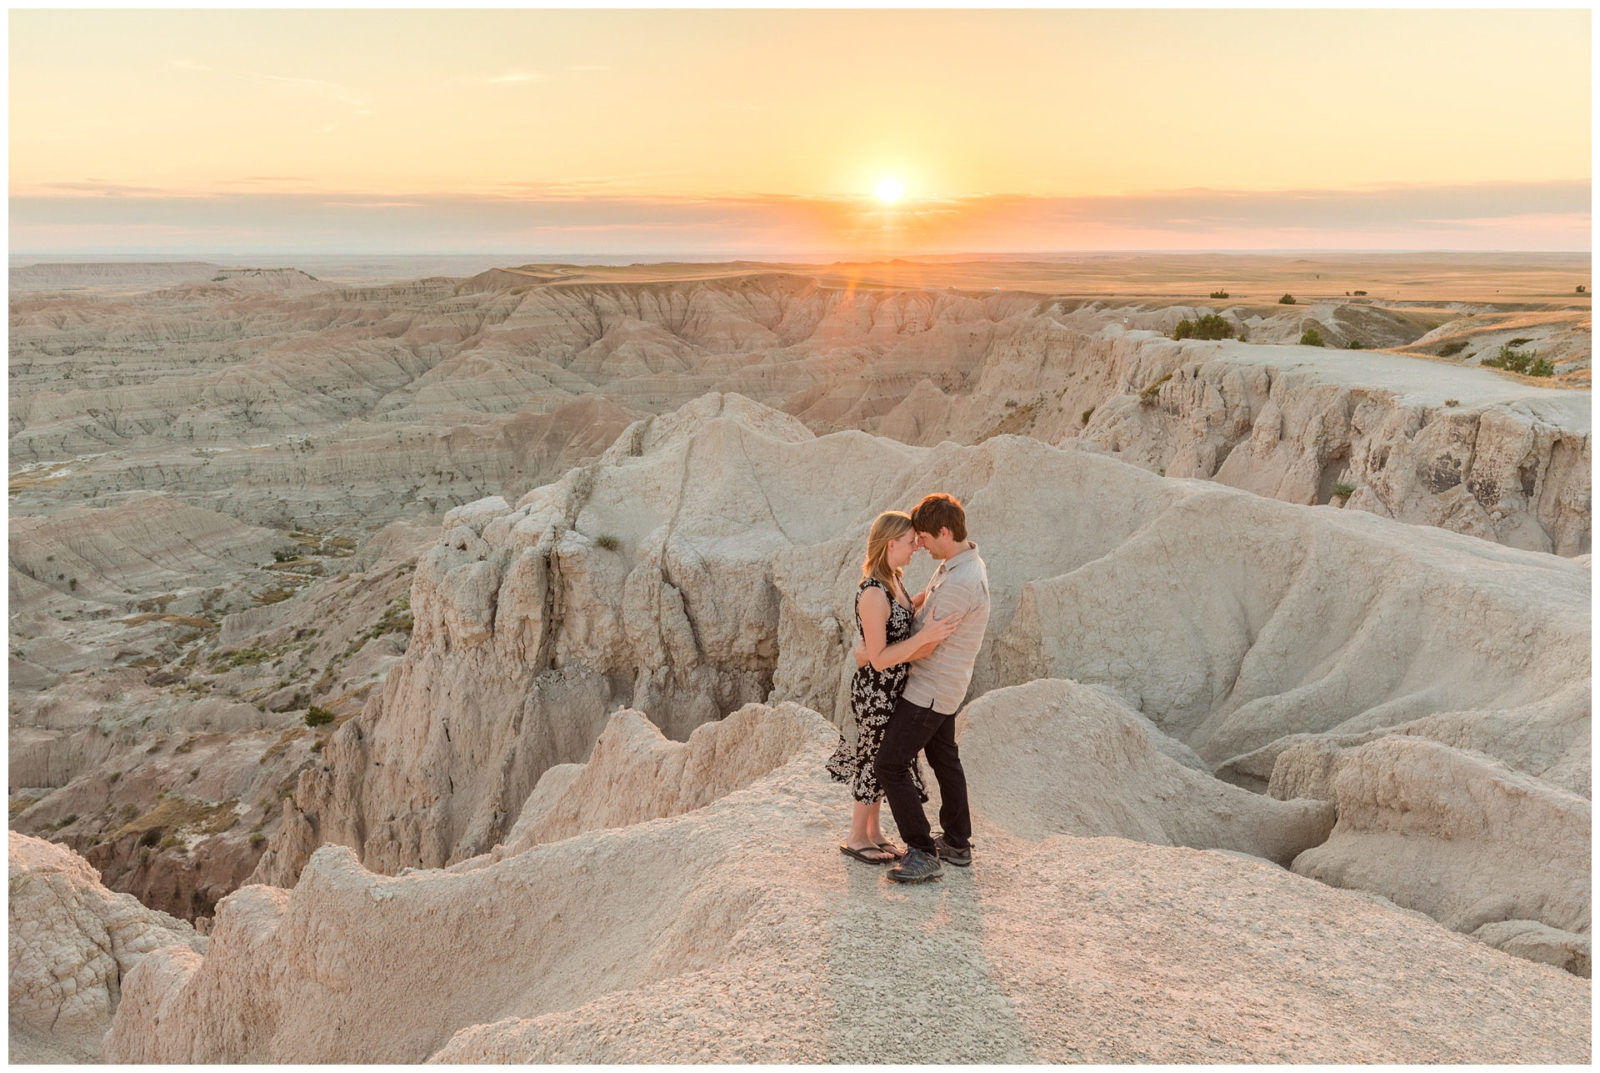 Sunset at the Pinnacles Overlook in Badlands National Park in South Dakota.